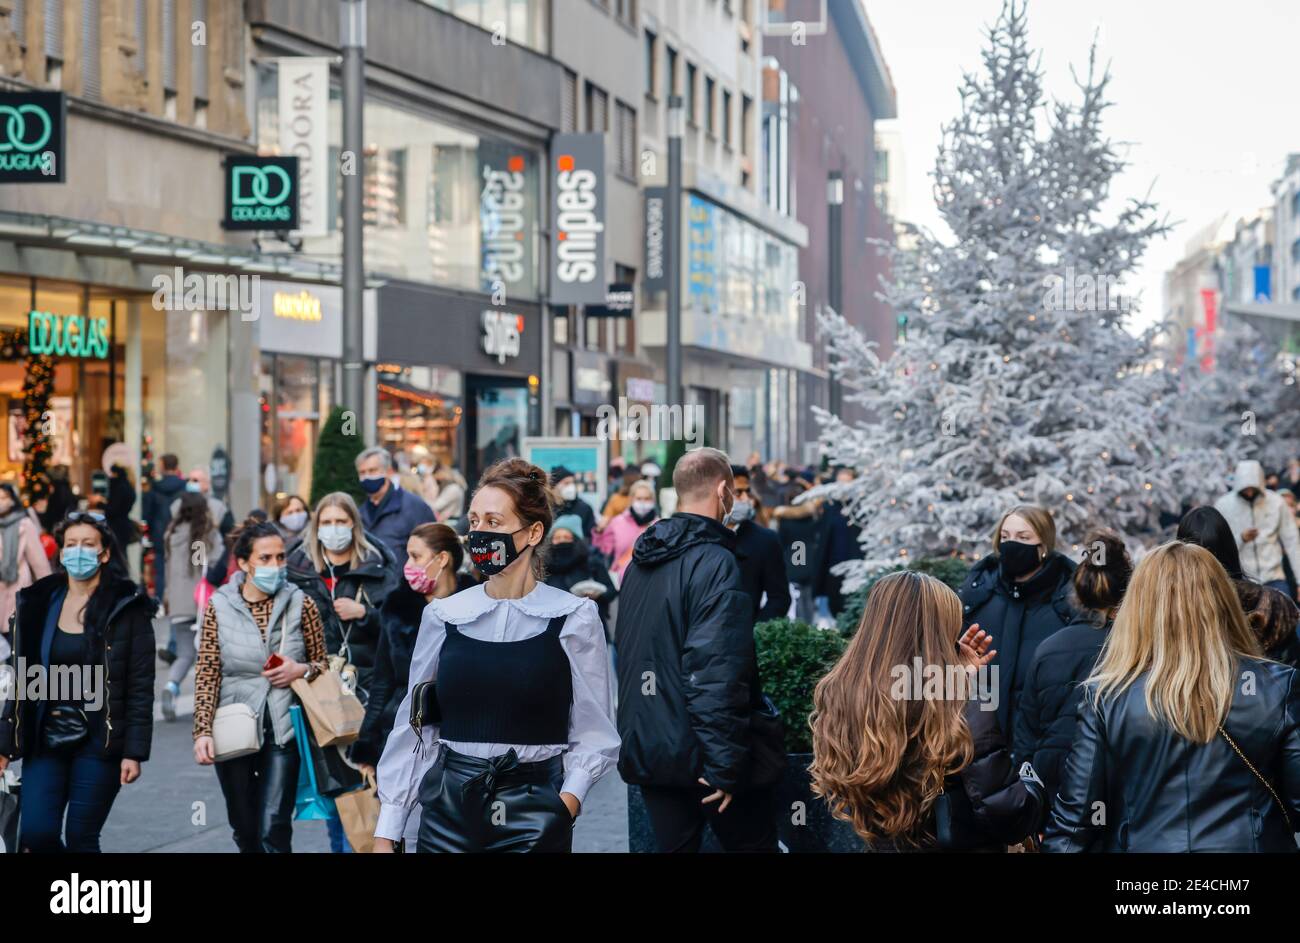 Duesseldorf, North Rhine-Westphalia, Germany - Duesseldorf city center in times of the corona crisis during the second part of lockdown, passers-by with protective masks while shopping on Black Friday weekend in the pedestrian zone decorated for Christmas. Stock Photo